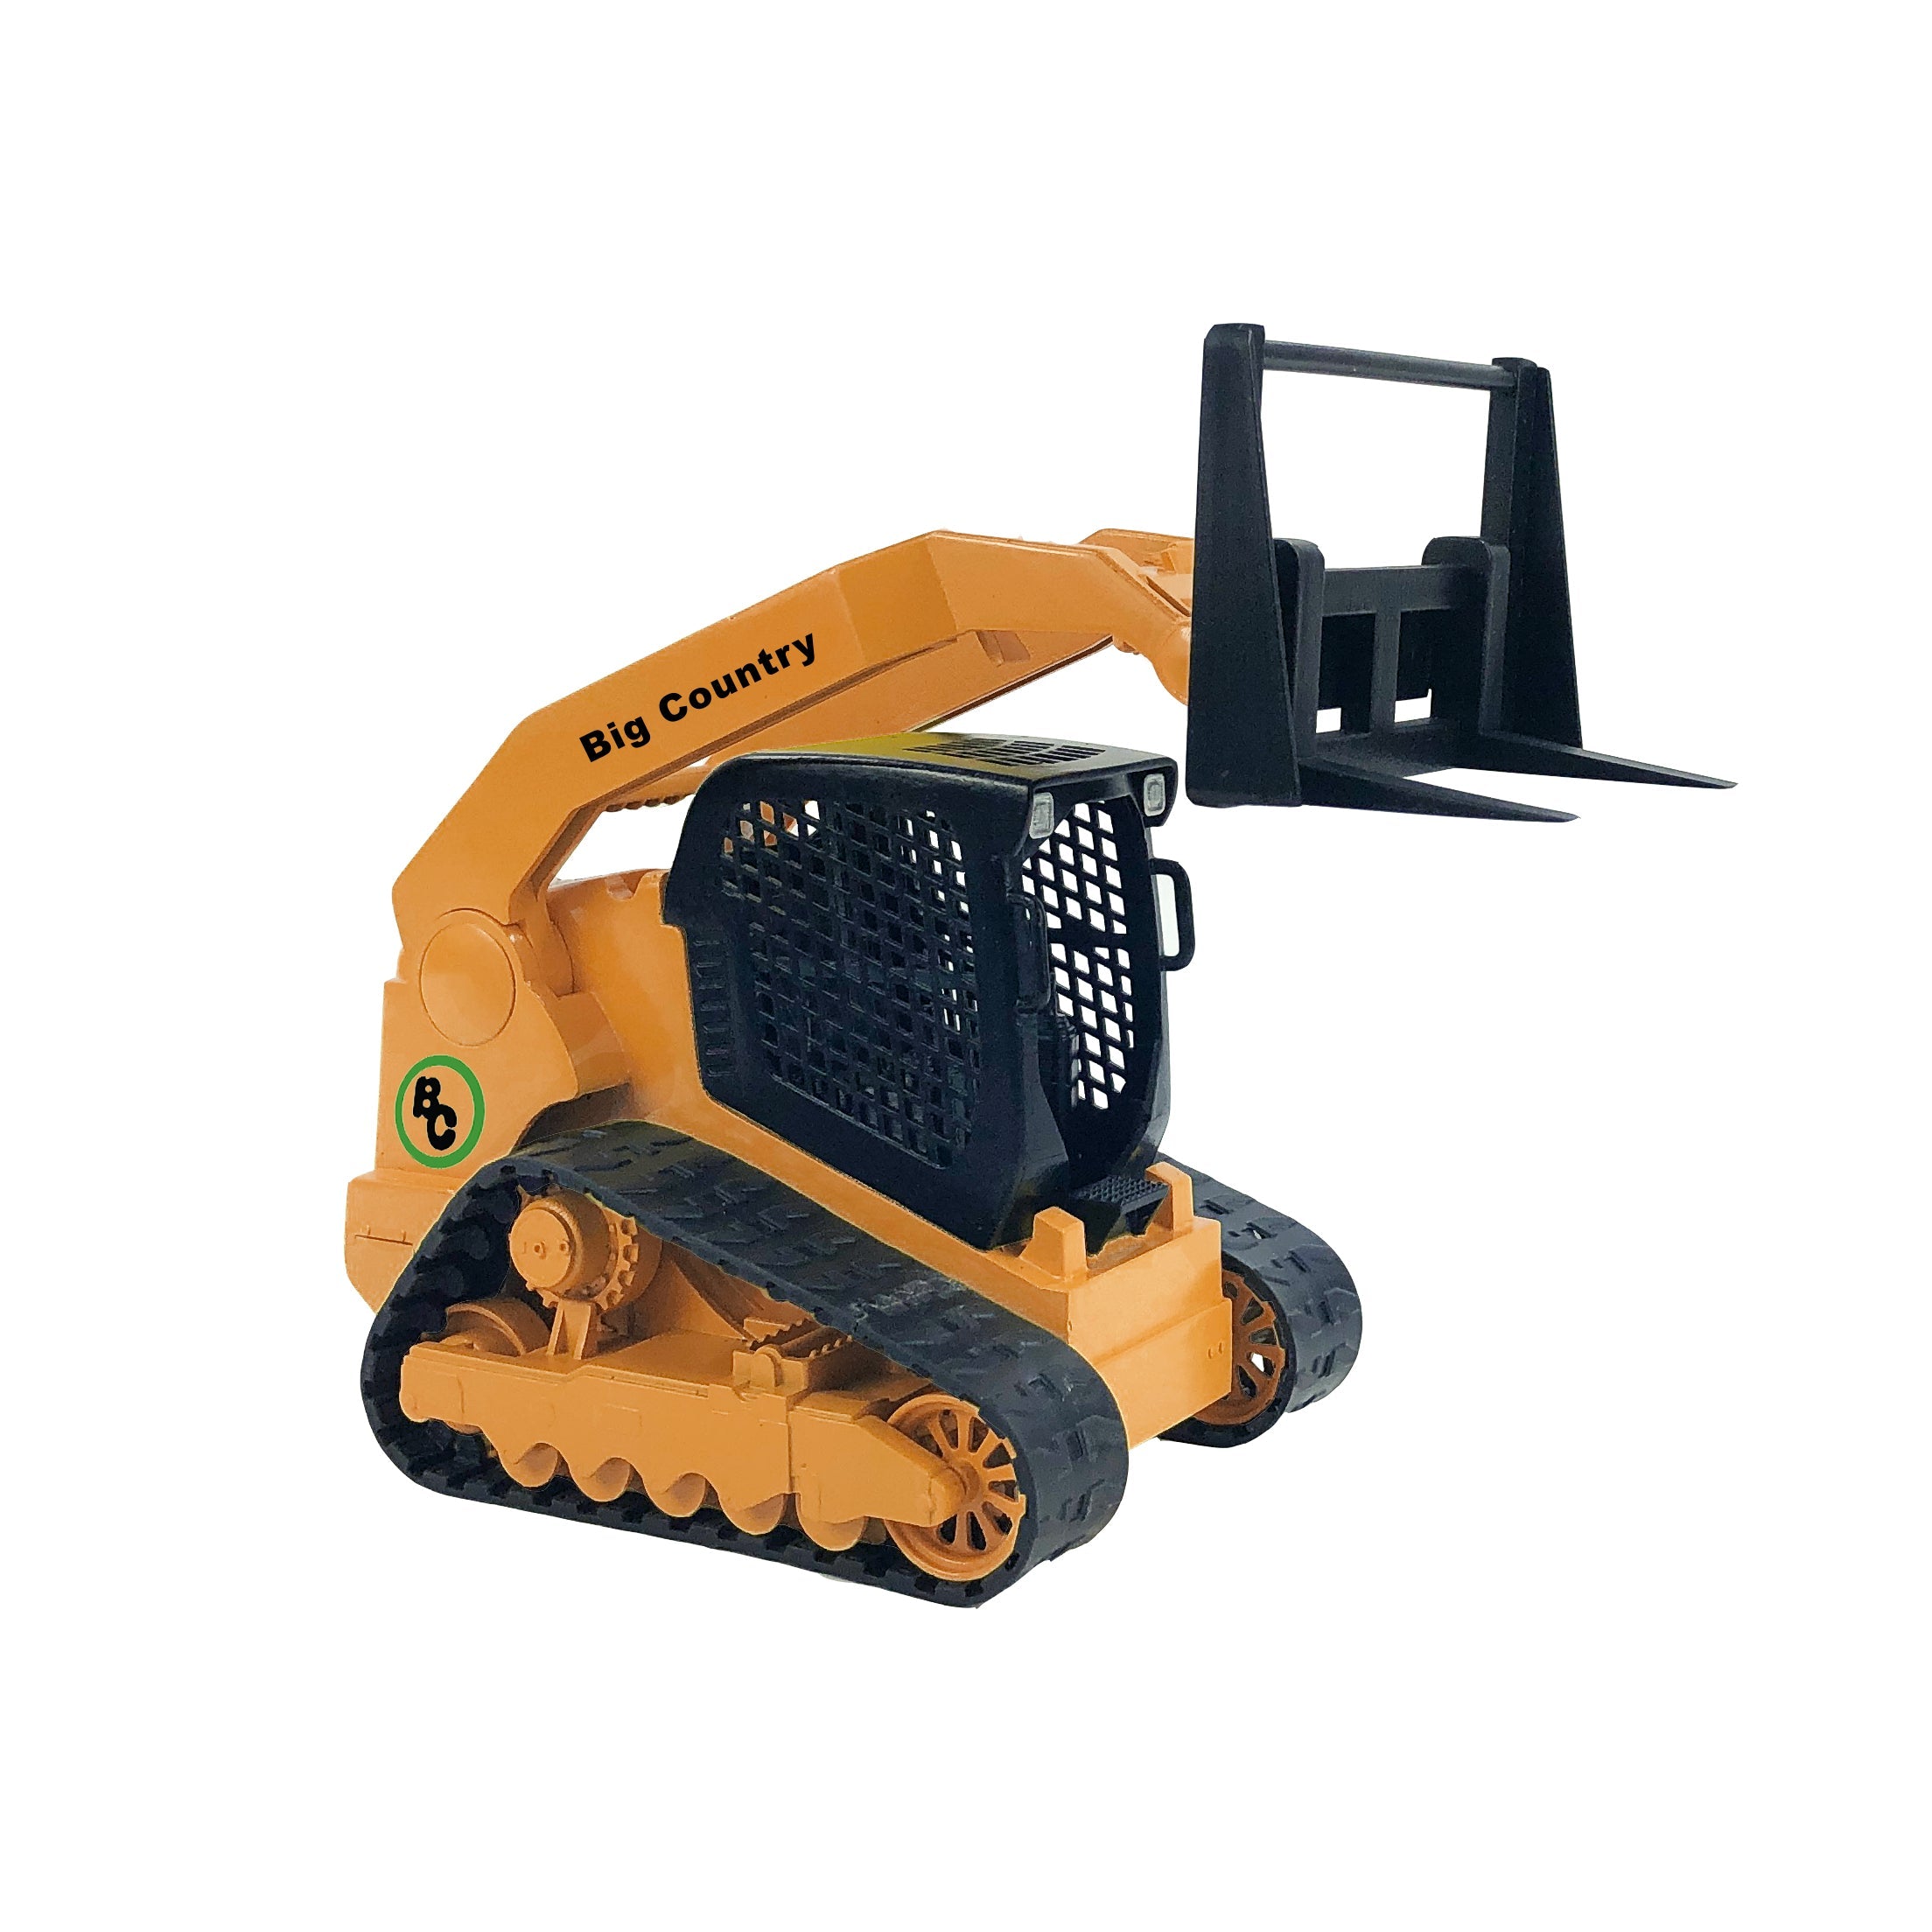 Skid Steer/Mini Excavator Attachments Products